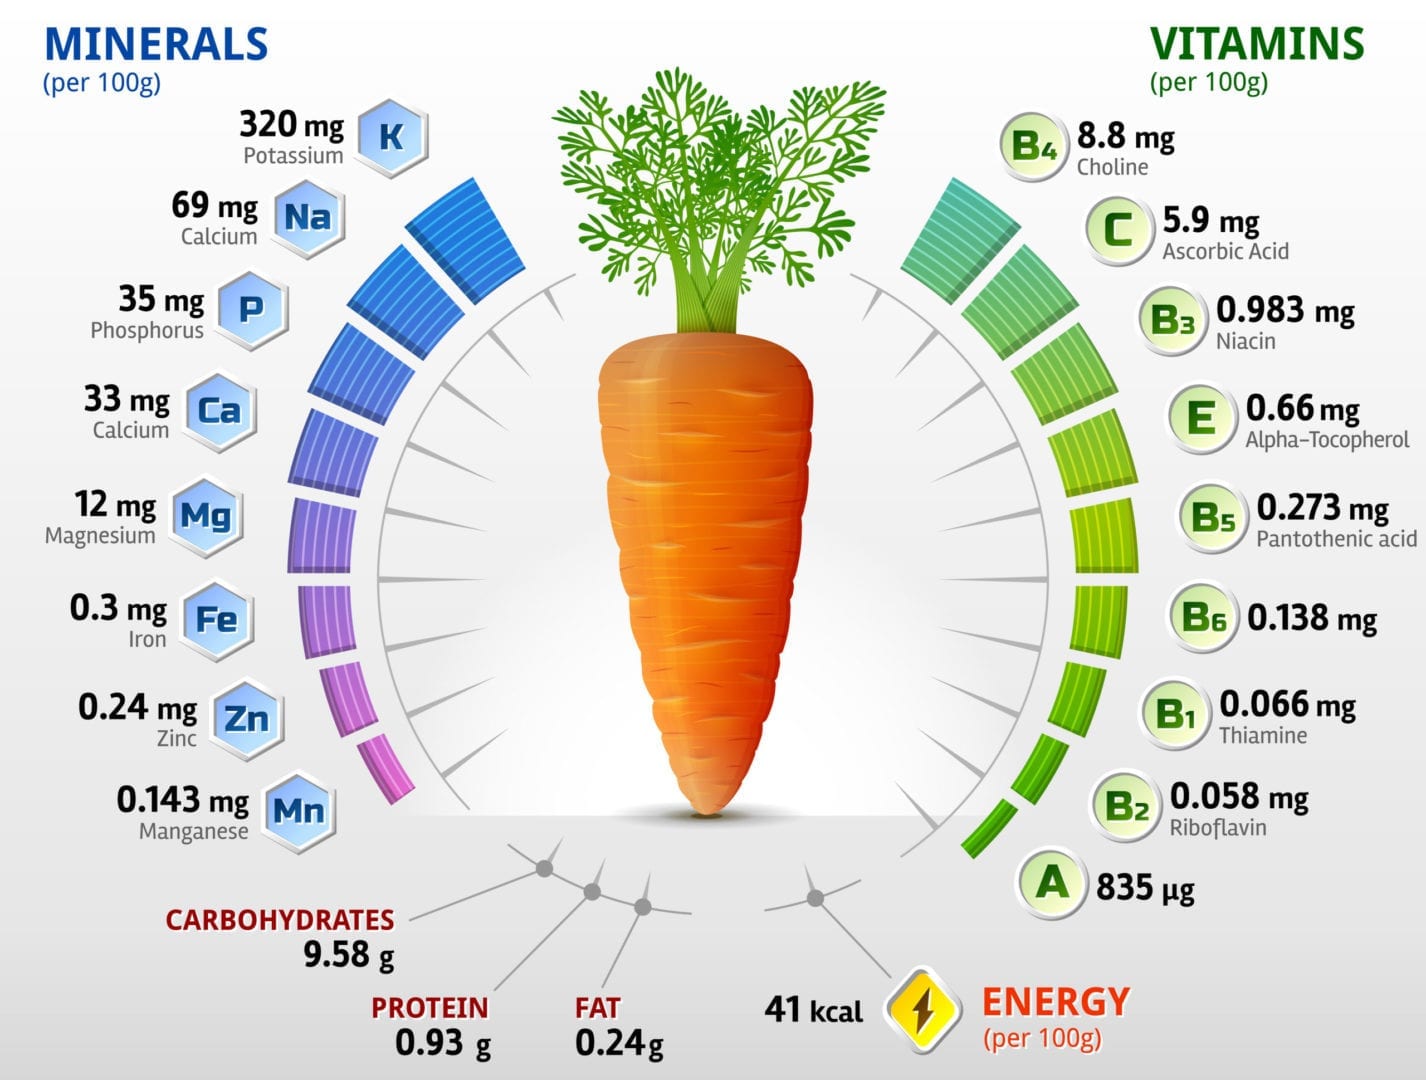 The nutritional value of carrots